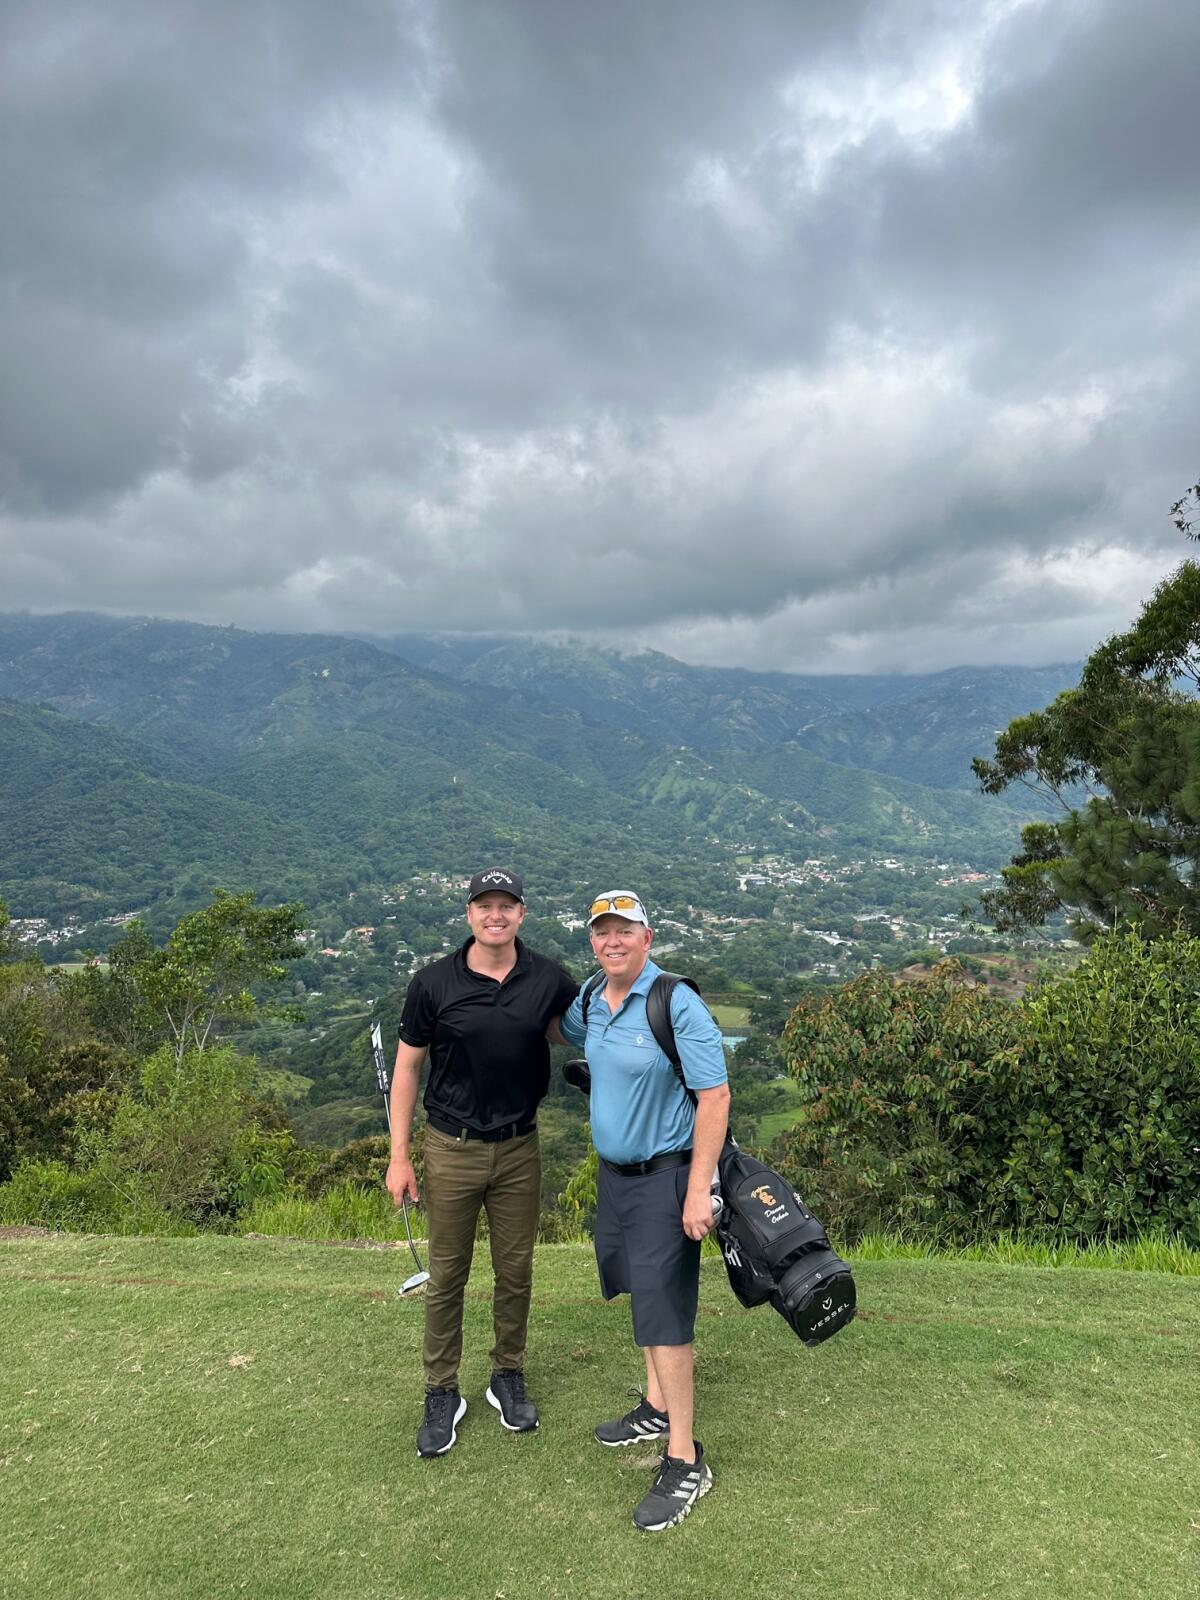 Danny Ochoa and Herb Morgan on the course in Colombia.